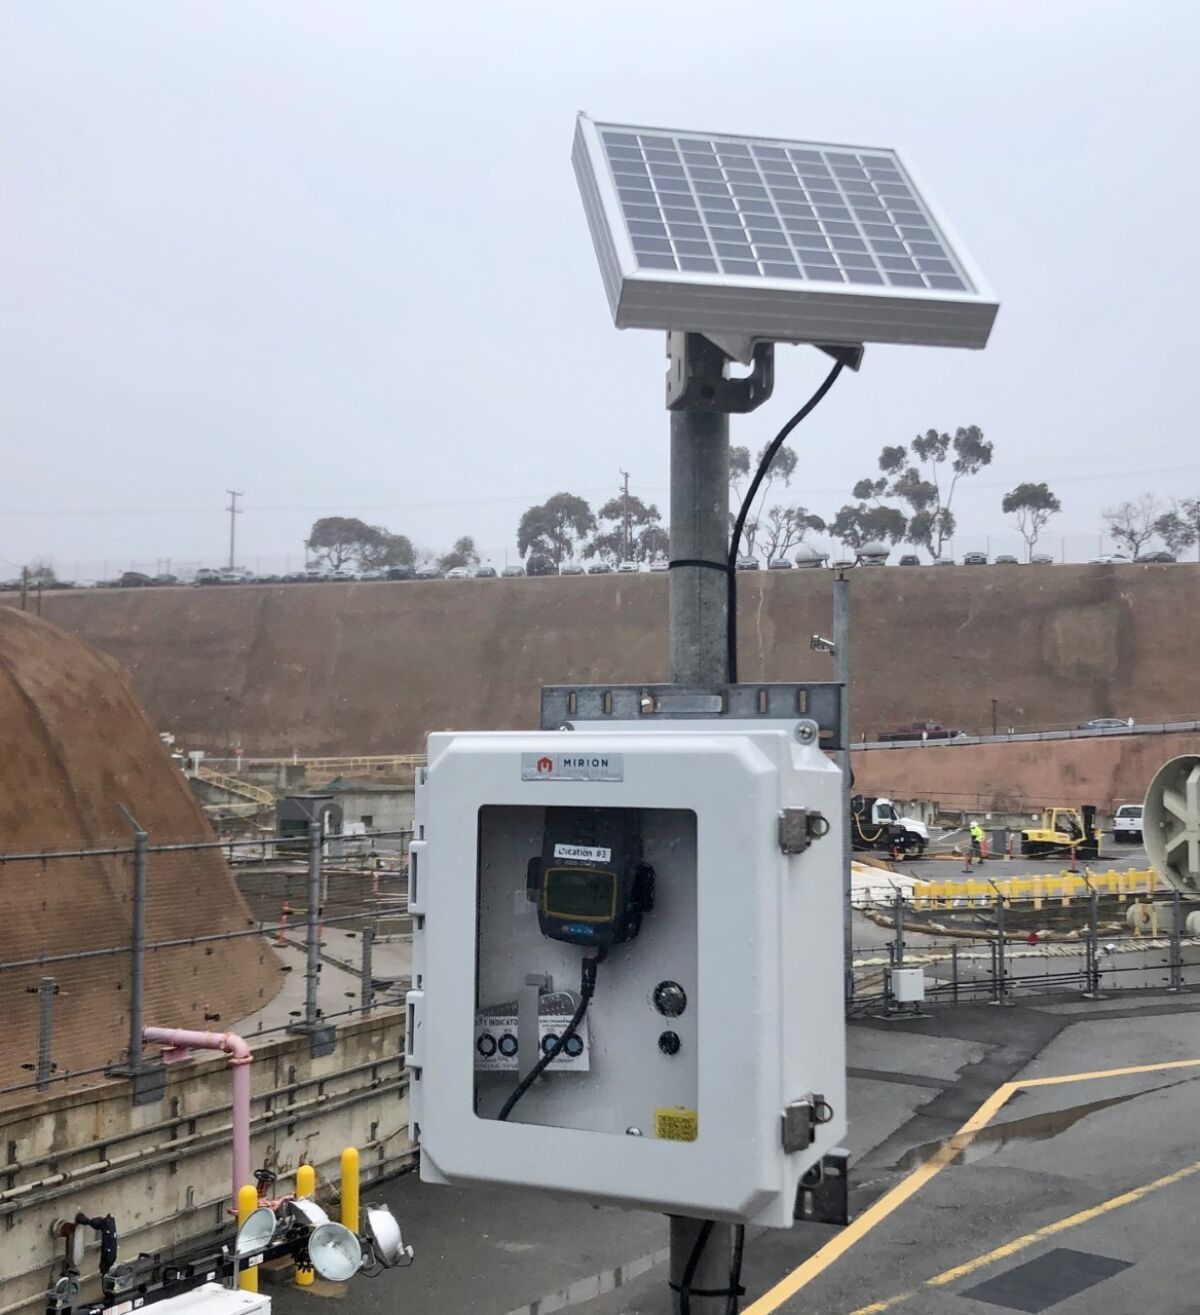 One of the monitors installed at the San Onofre Nuclear Generating Station to measure radiation at the storage facility that holds used up nuclear fuel in canisters at the plant.